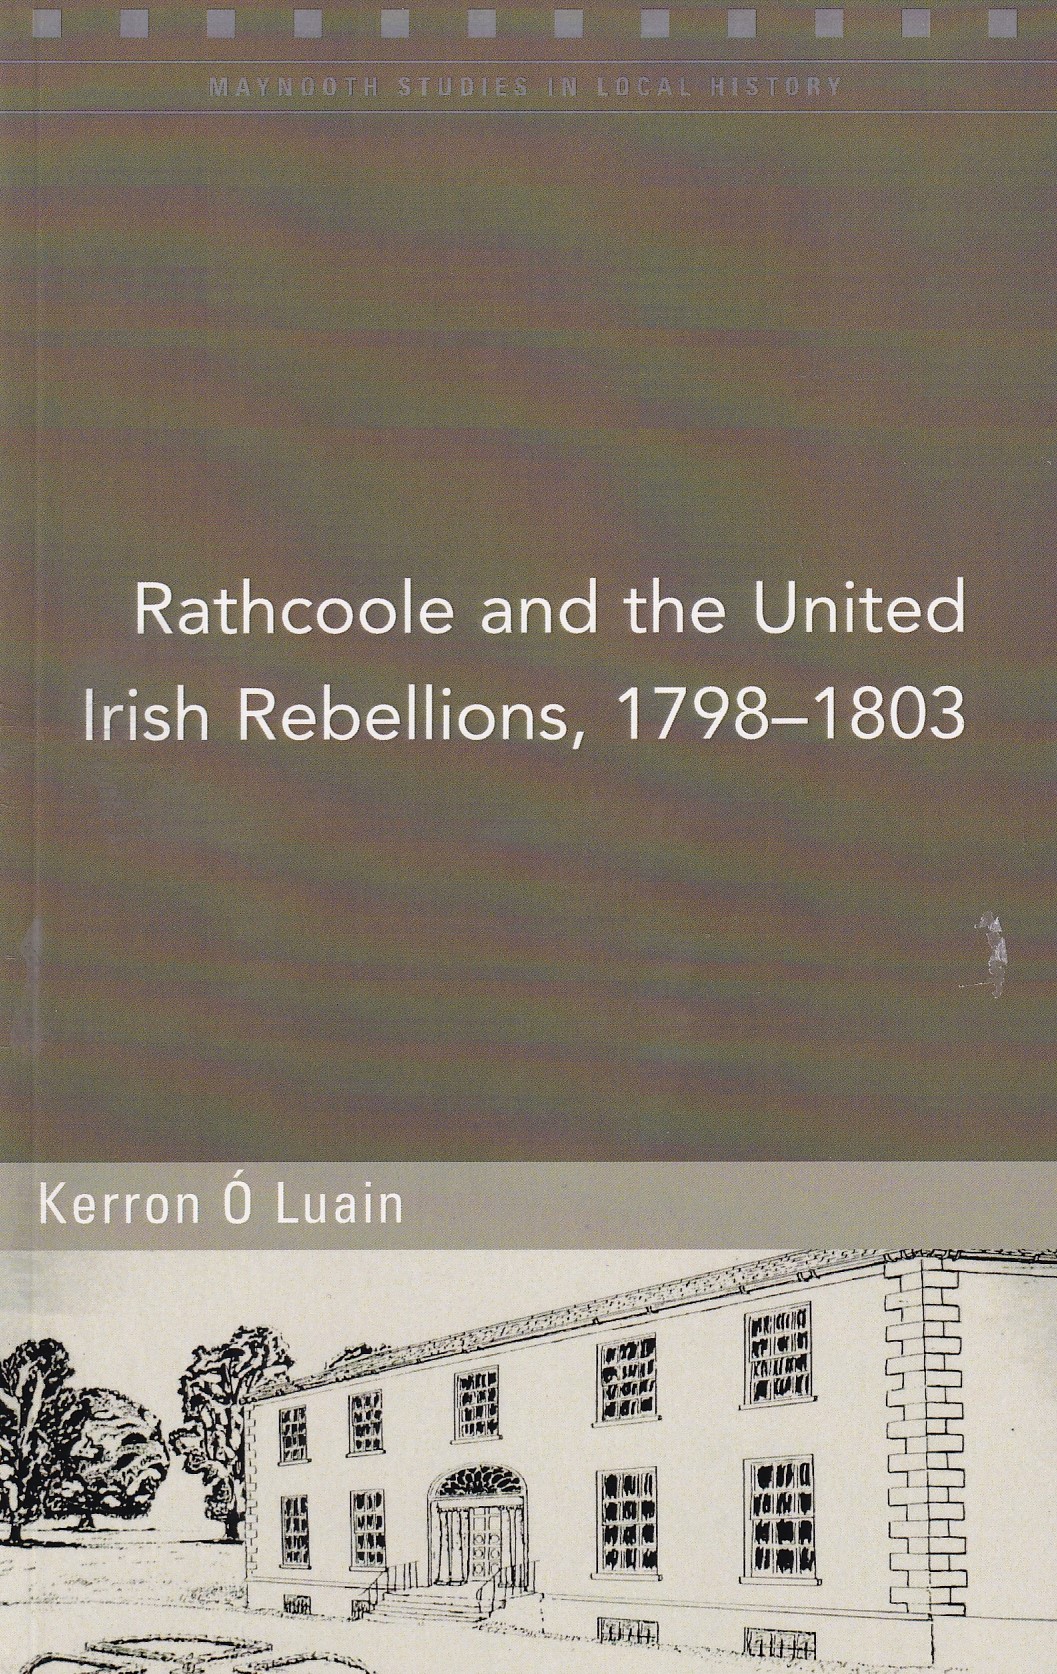 Rathcoole and the United Irish Rebellions, 1798-1803 (Maynooth Studies in Local History) | Kerron Ó Luain | Charlie Byrne's